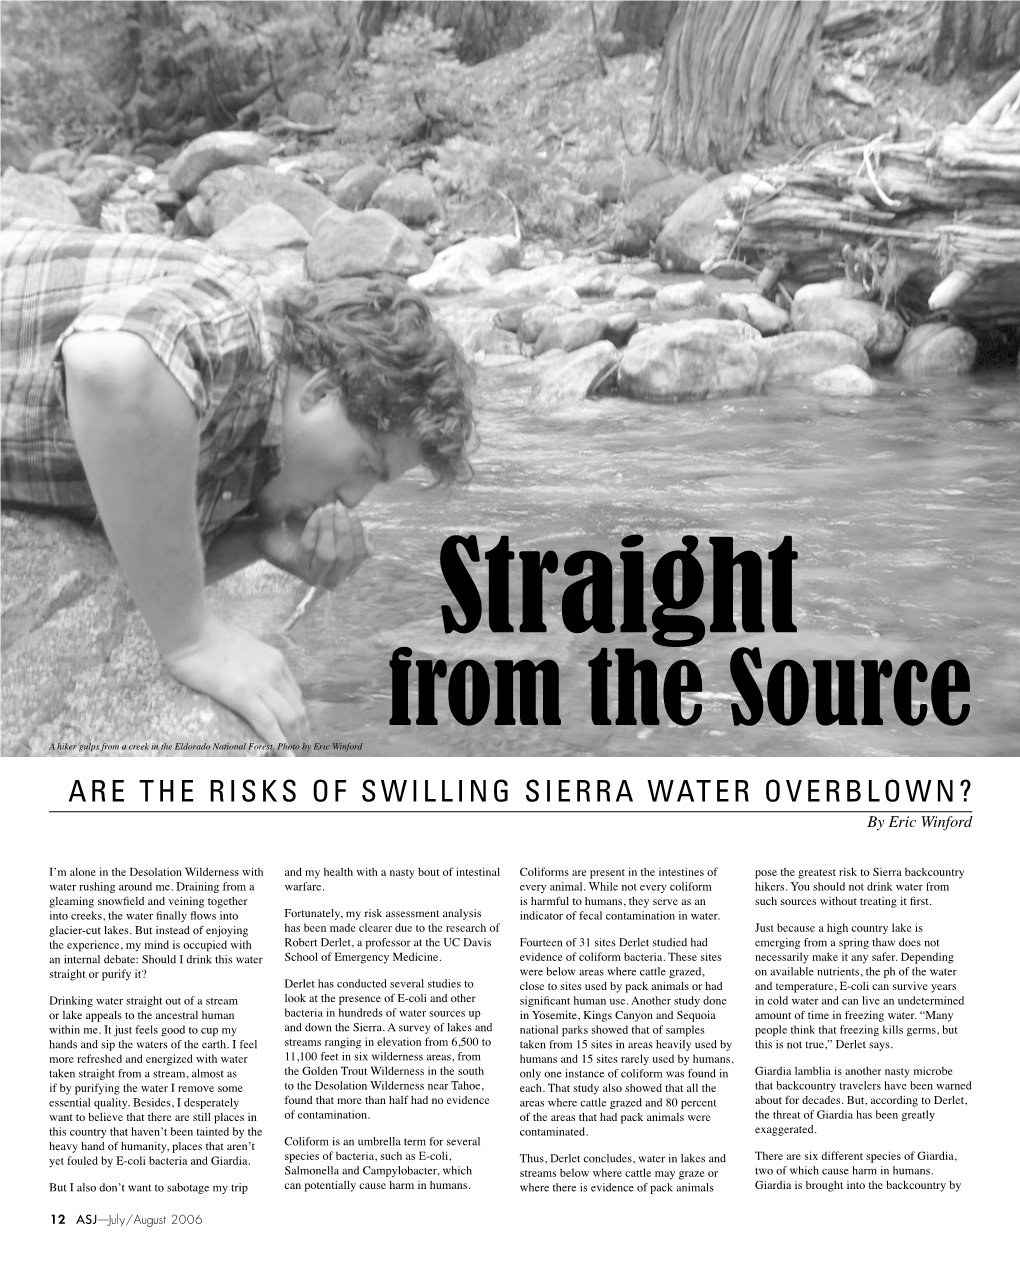 ARE the RISKS of SWILLING SIERRA WATER OVERBLOWN? by Eric Winford